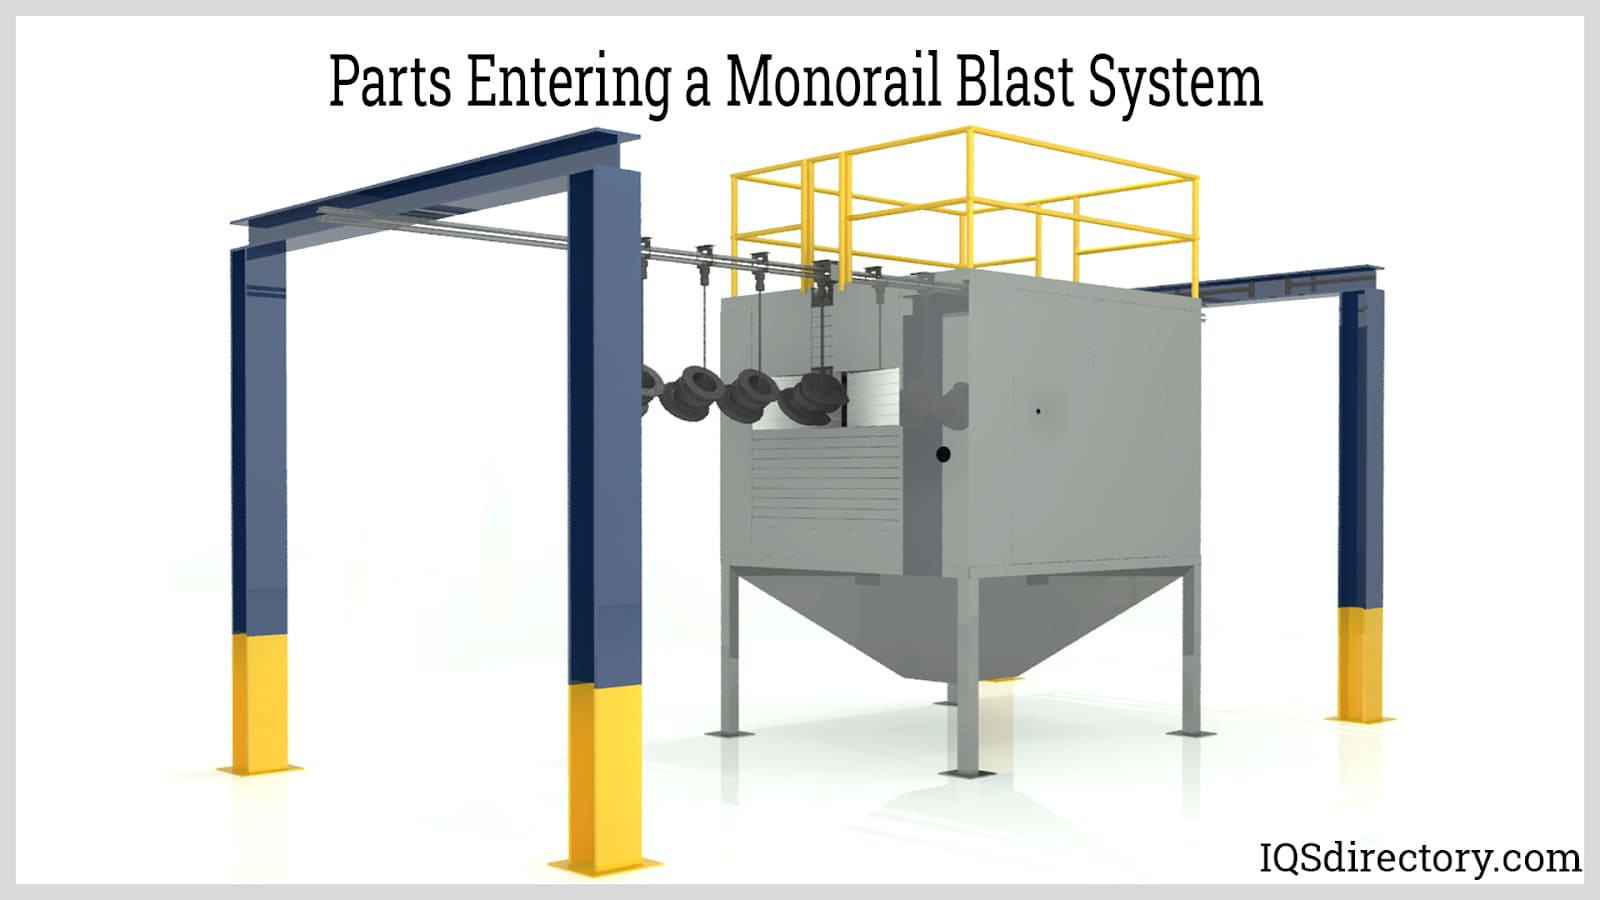 Parts Entering a Monorail Blast System